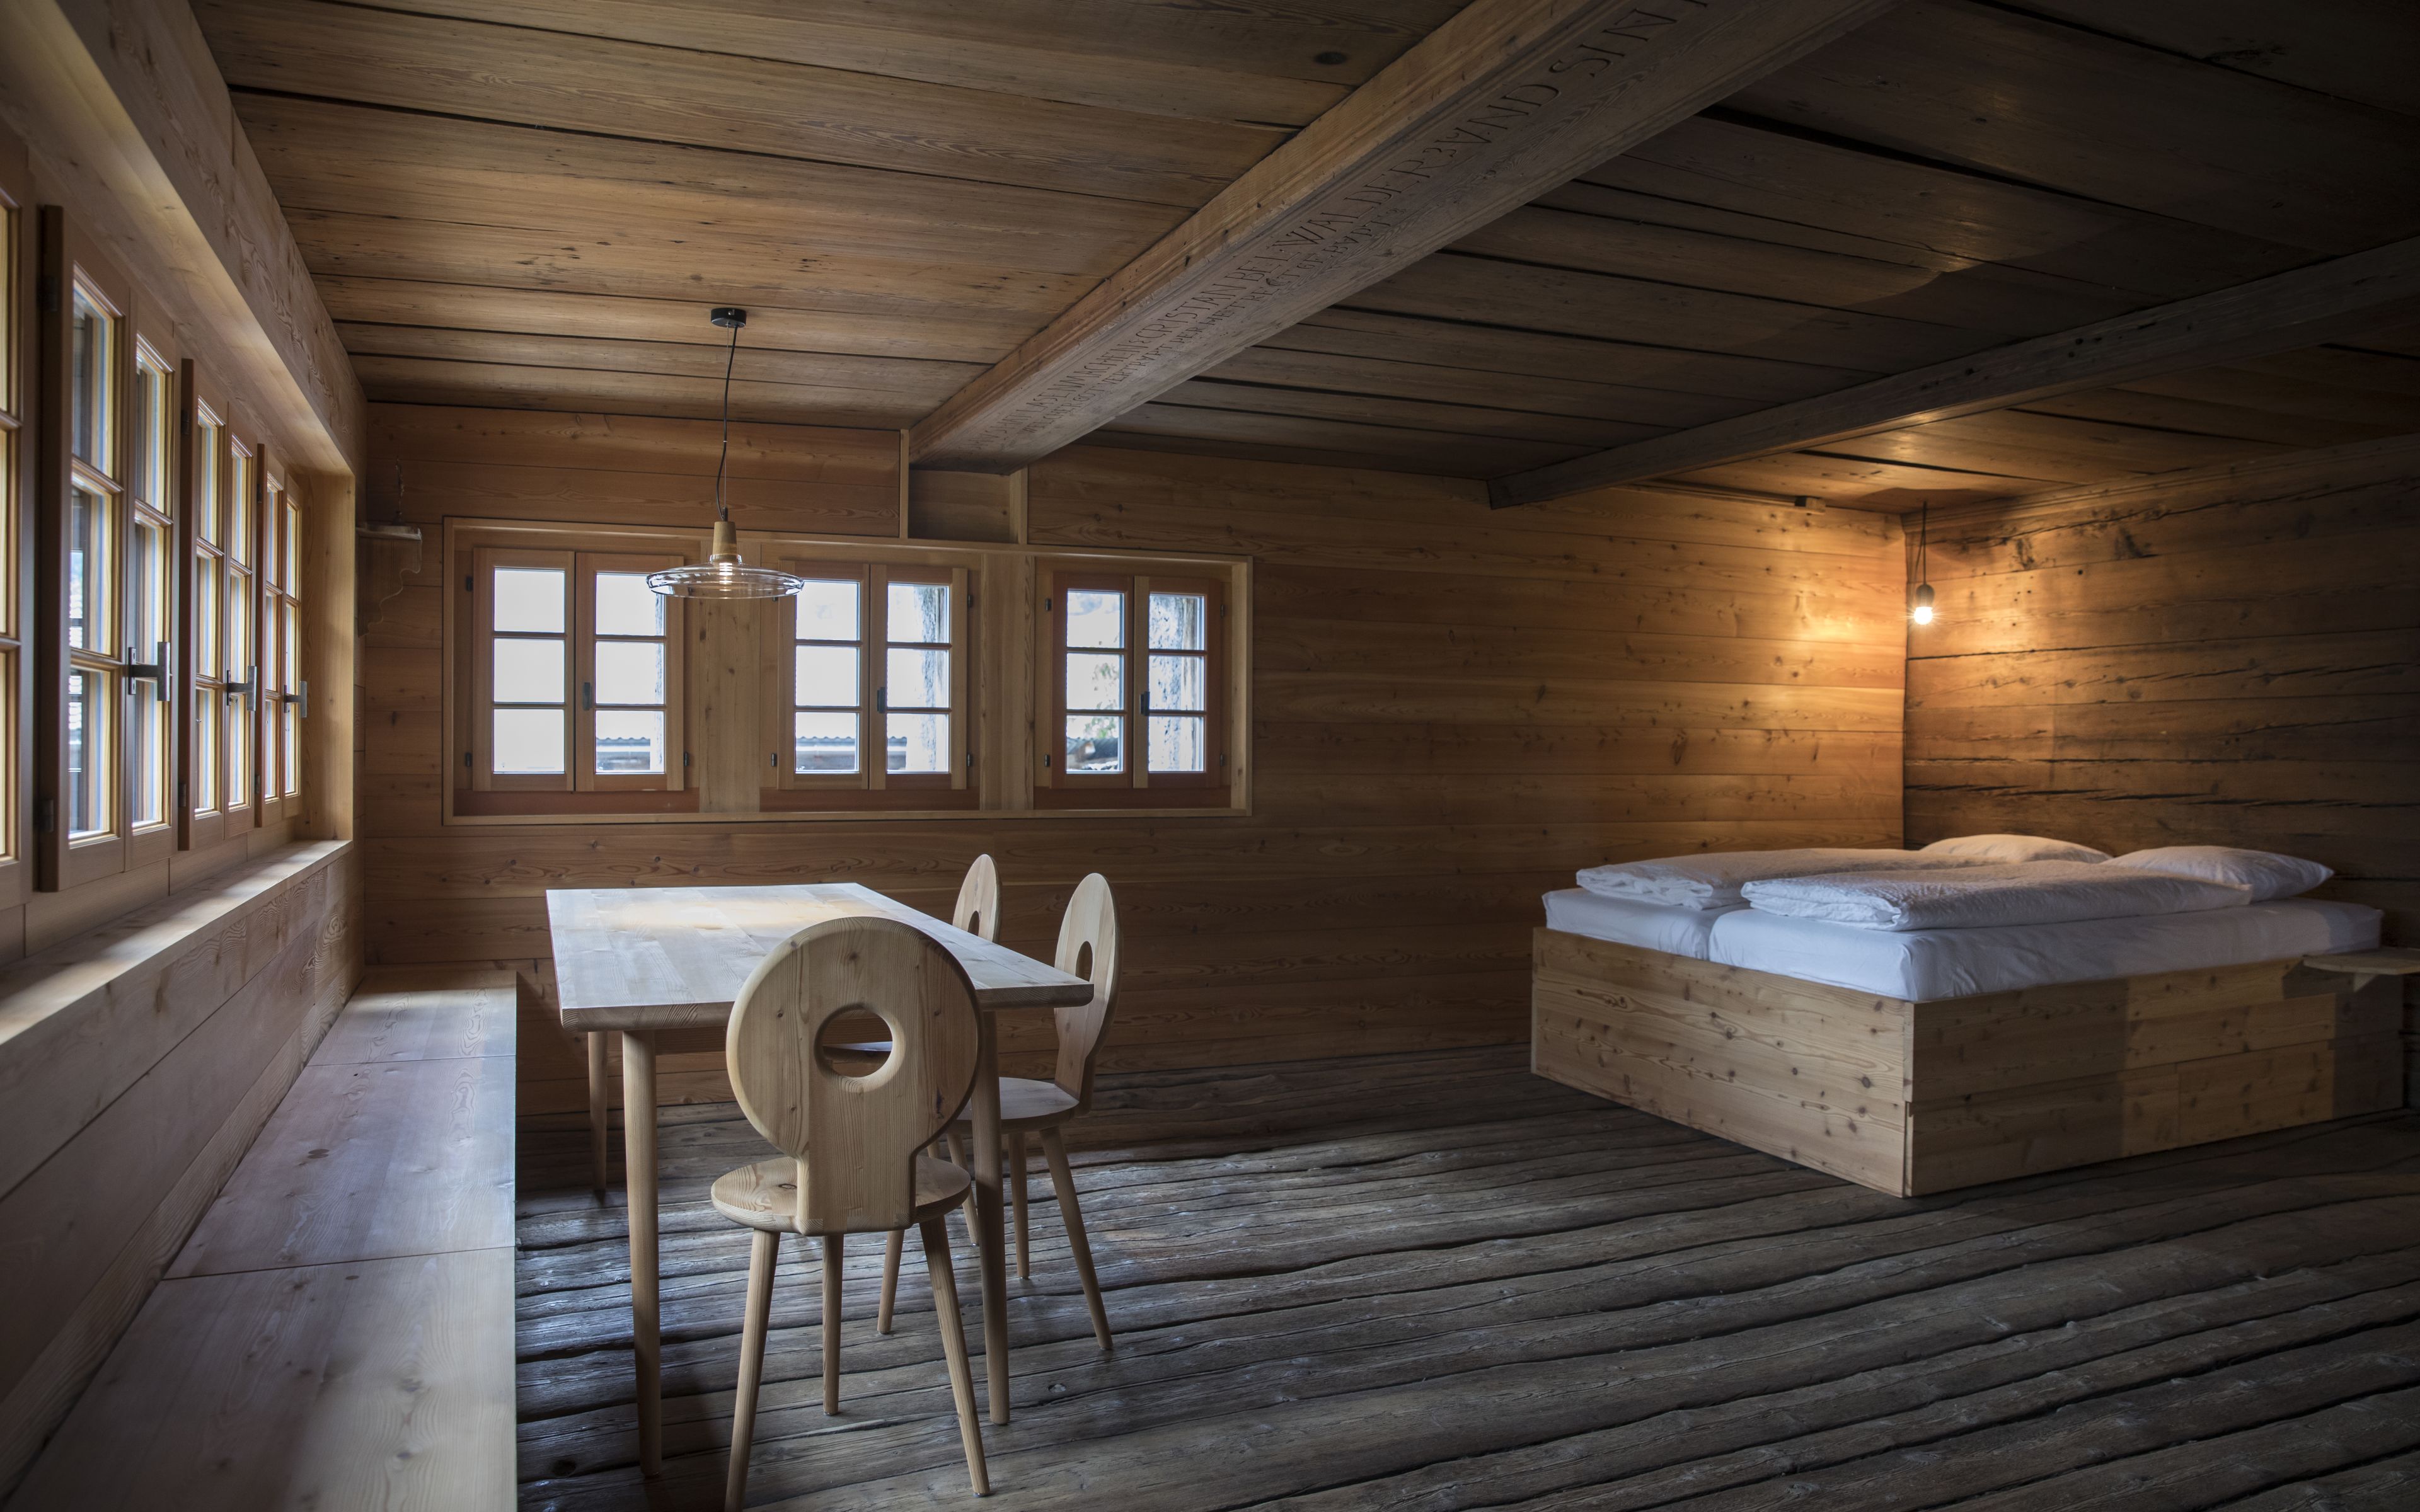 Renovated chalet with bed, chairs and wooden table. Valaisan furniture Valais Wallis Schweiz Switzerland Suisse